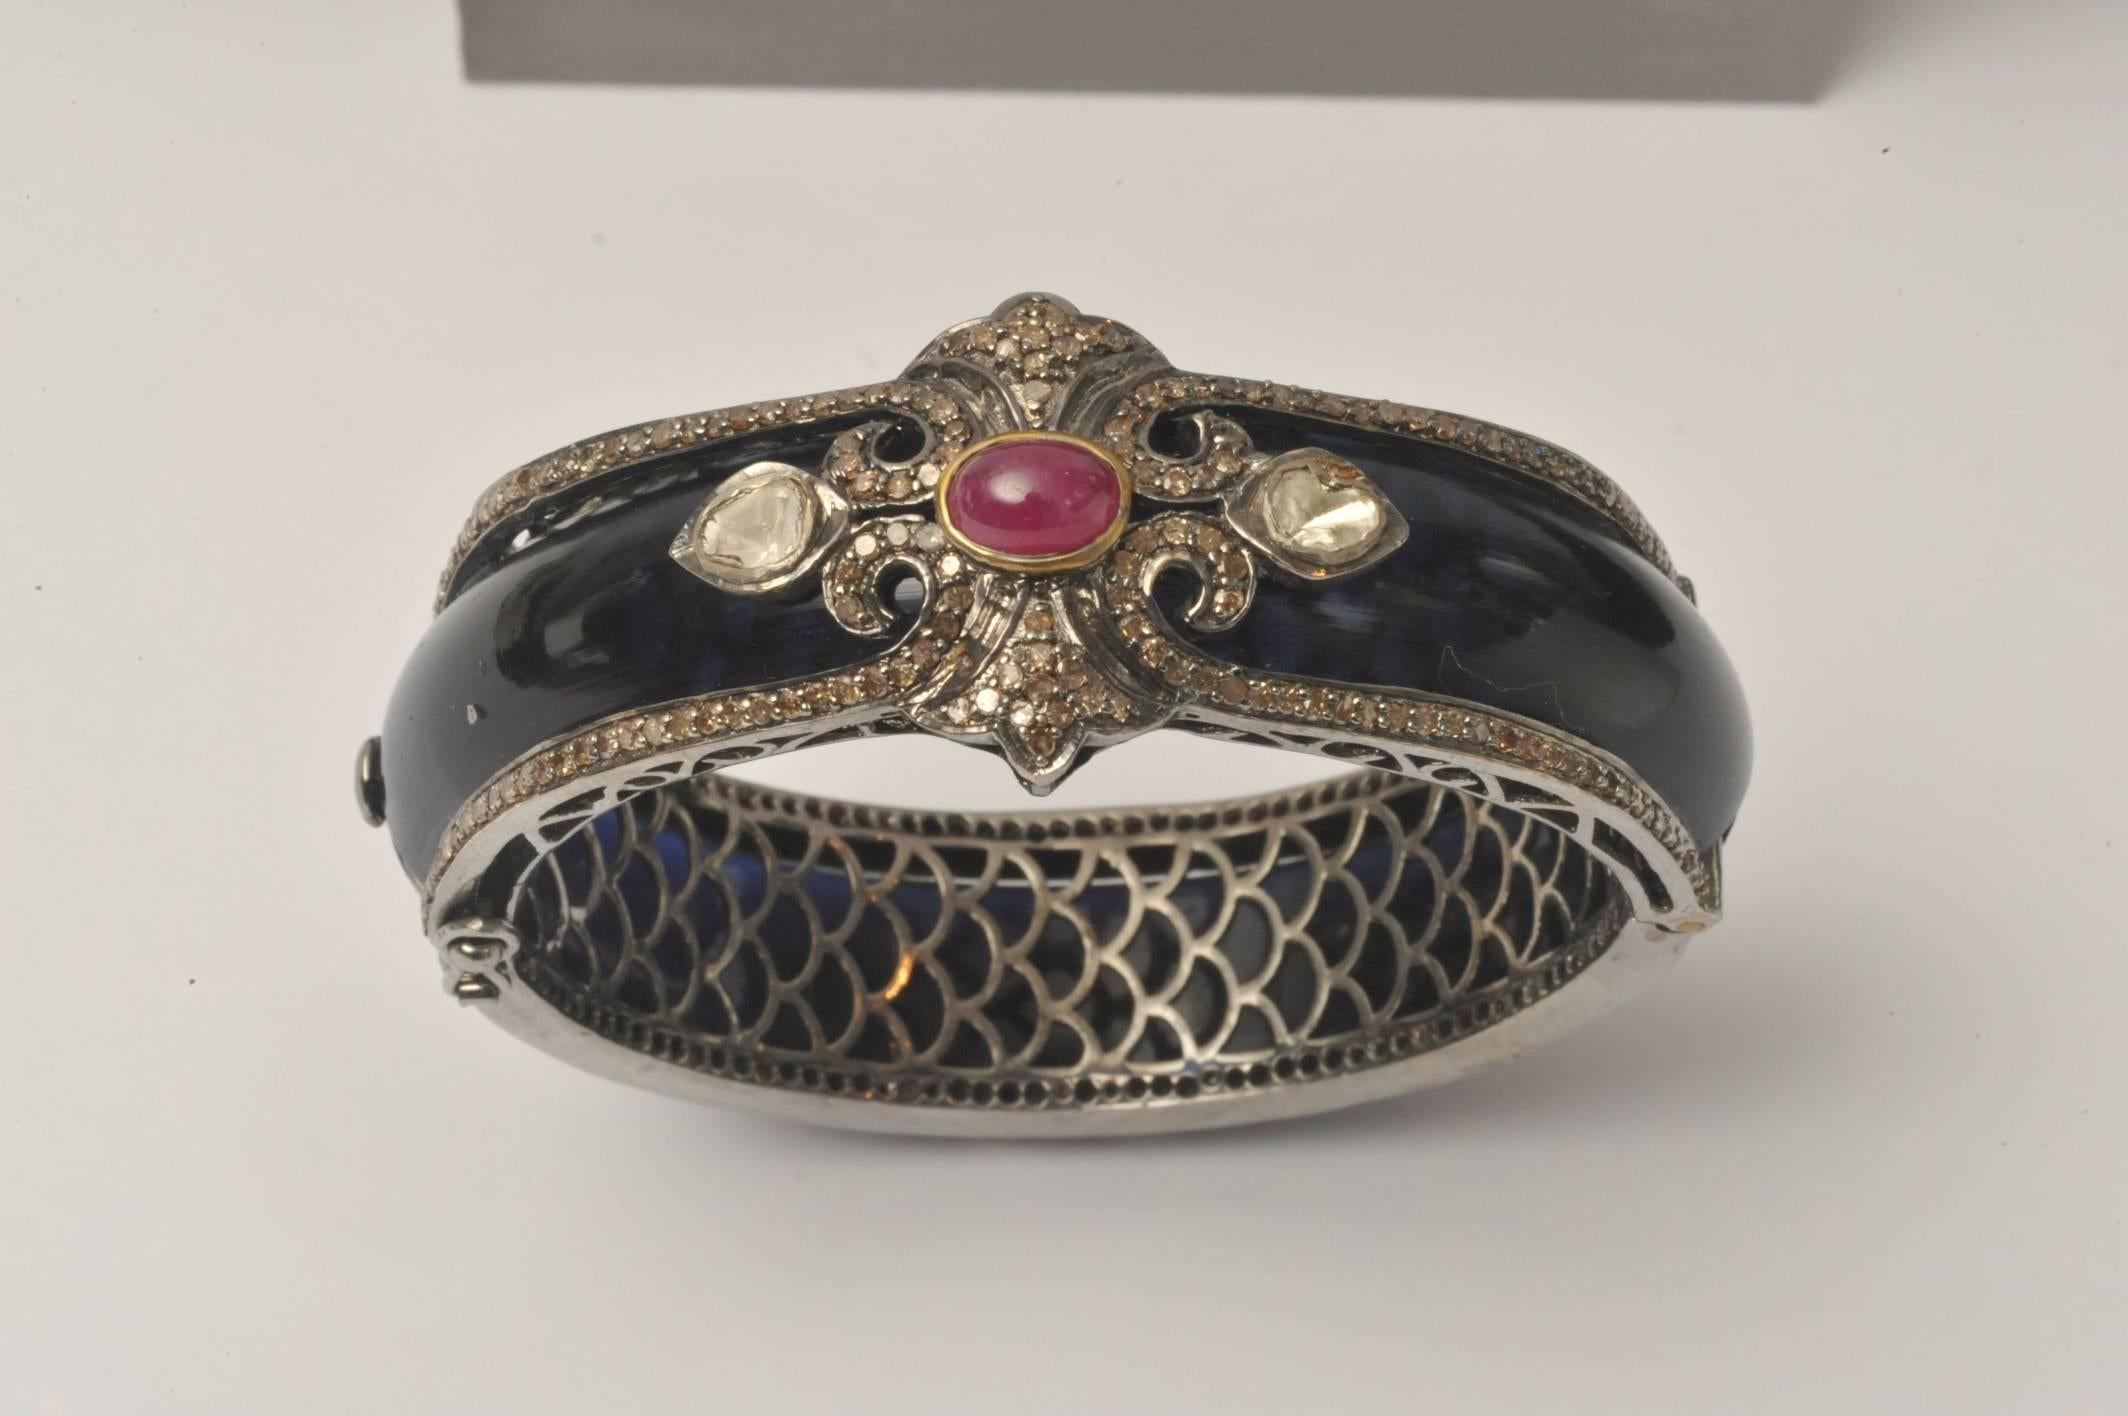 This is a regal modern Bakelite bracelet bordered with pave` set diamonds, rosecut diamonds on the top and a cabochon ruby at the center, all set in oxidized sterling.   A push clasp with double safeties at the side.  Sits close to the